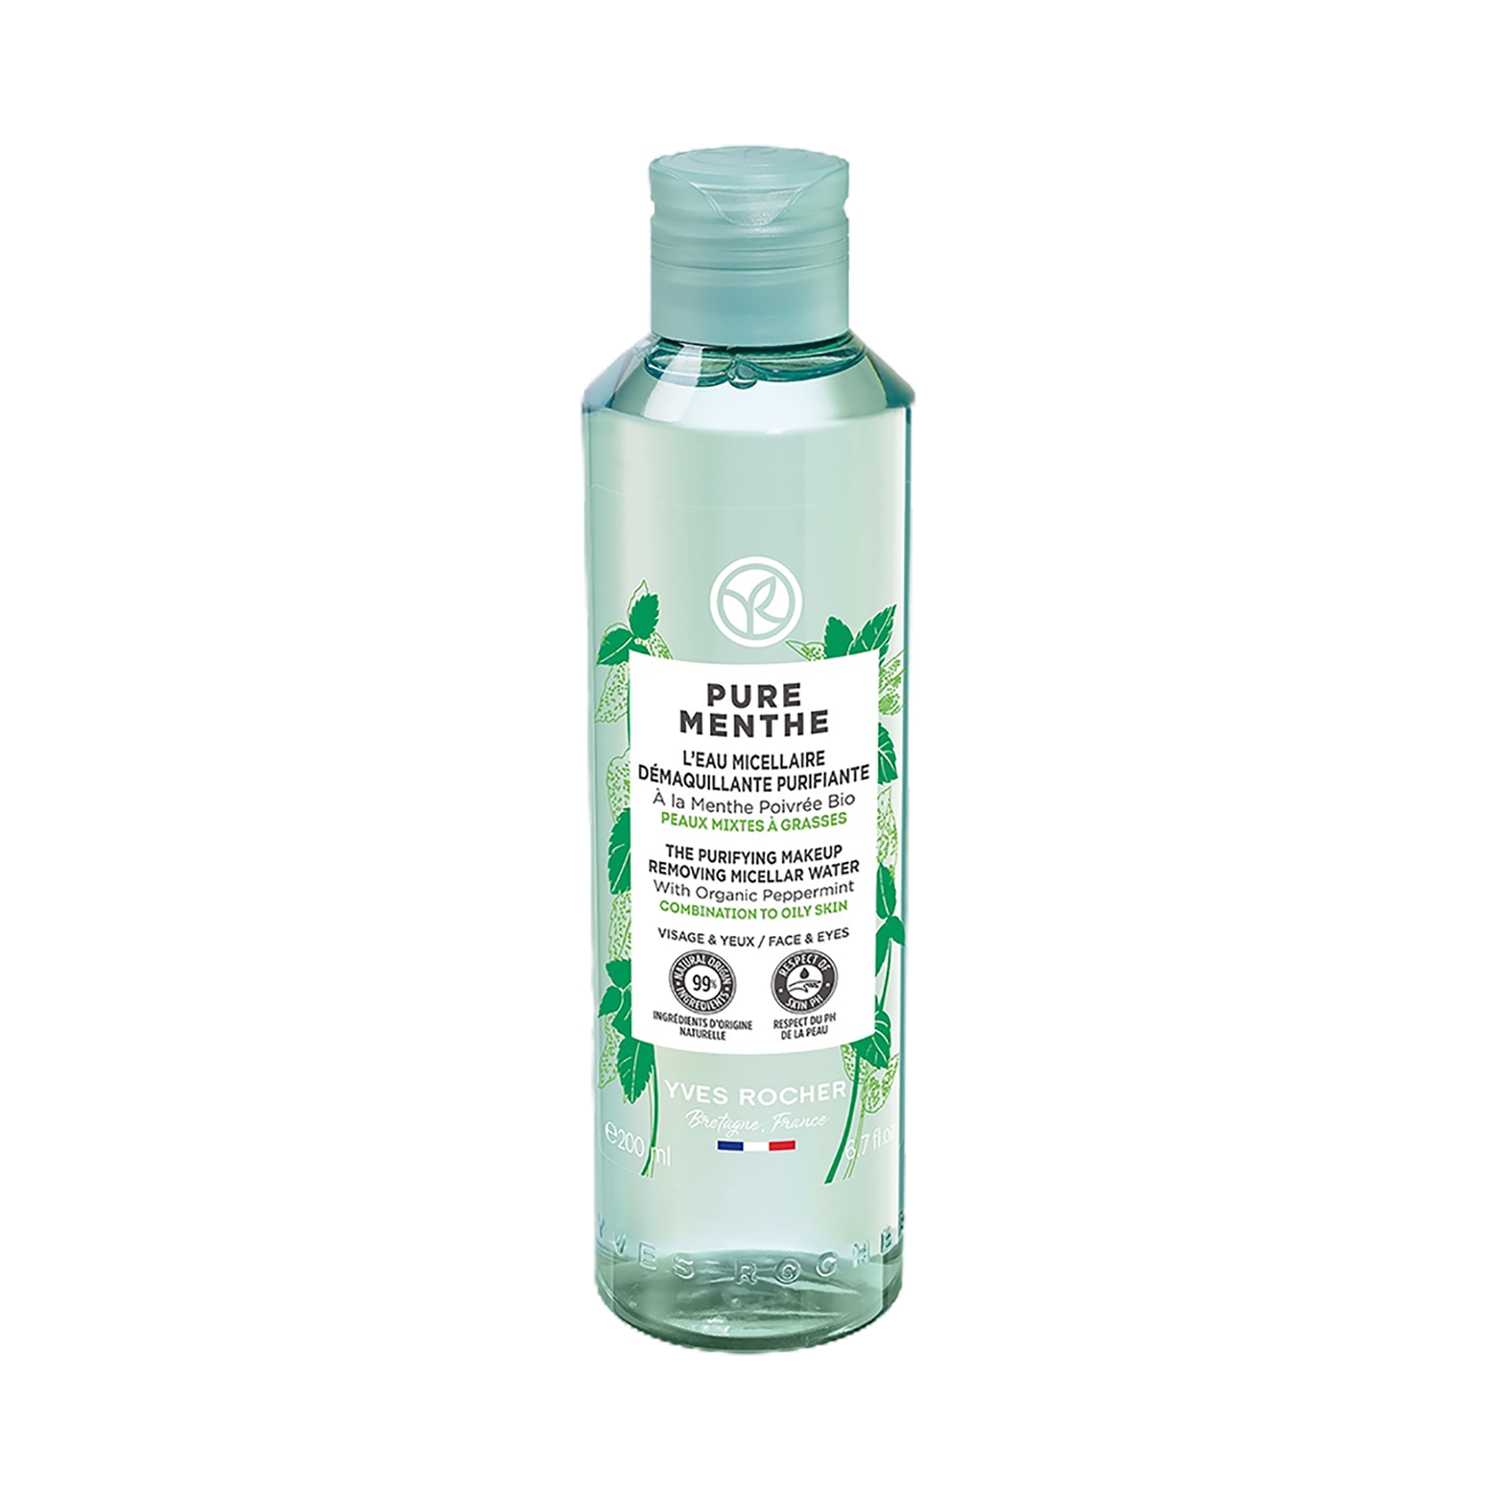 Yves Rocher | Yves Rocher Pure Menthe The Purifying Makeup Removing Micellar Water (200ml)